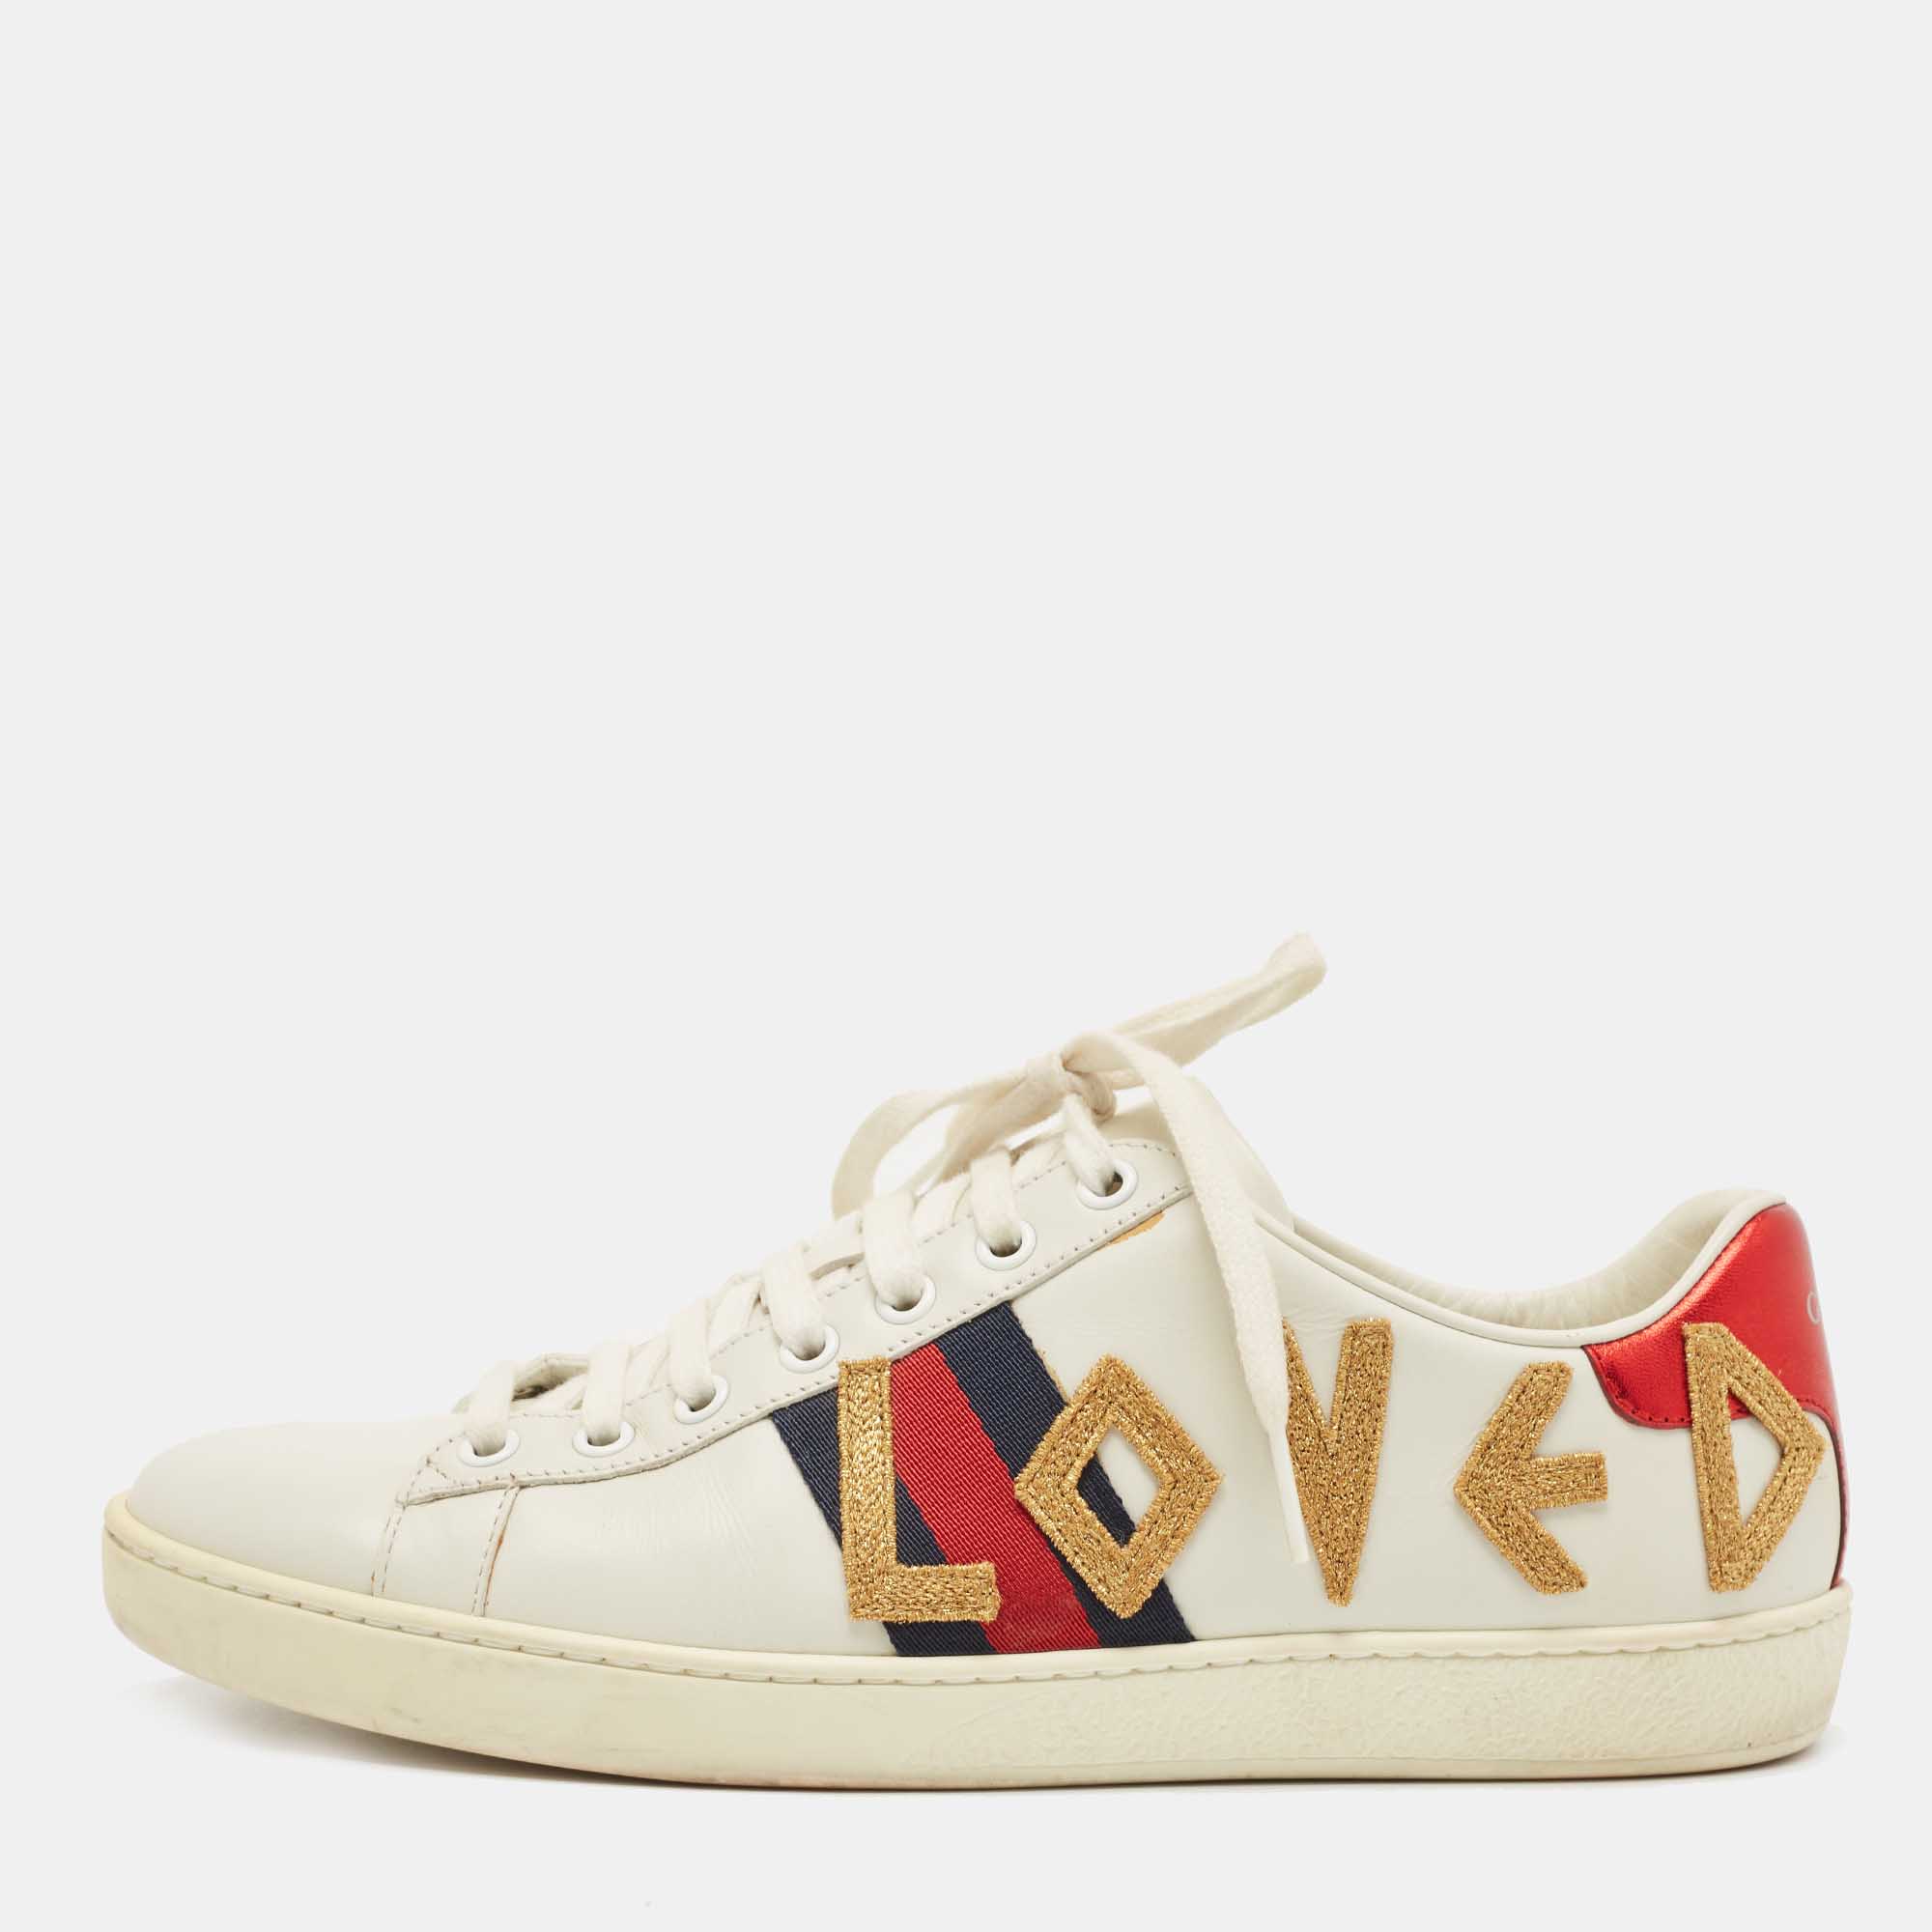 gucci ace sneakers price